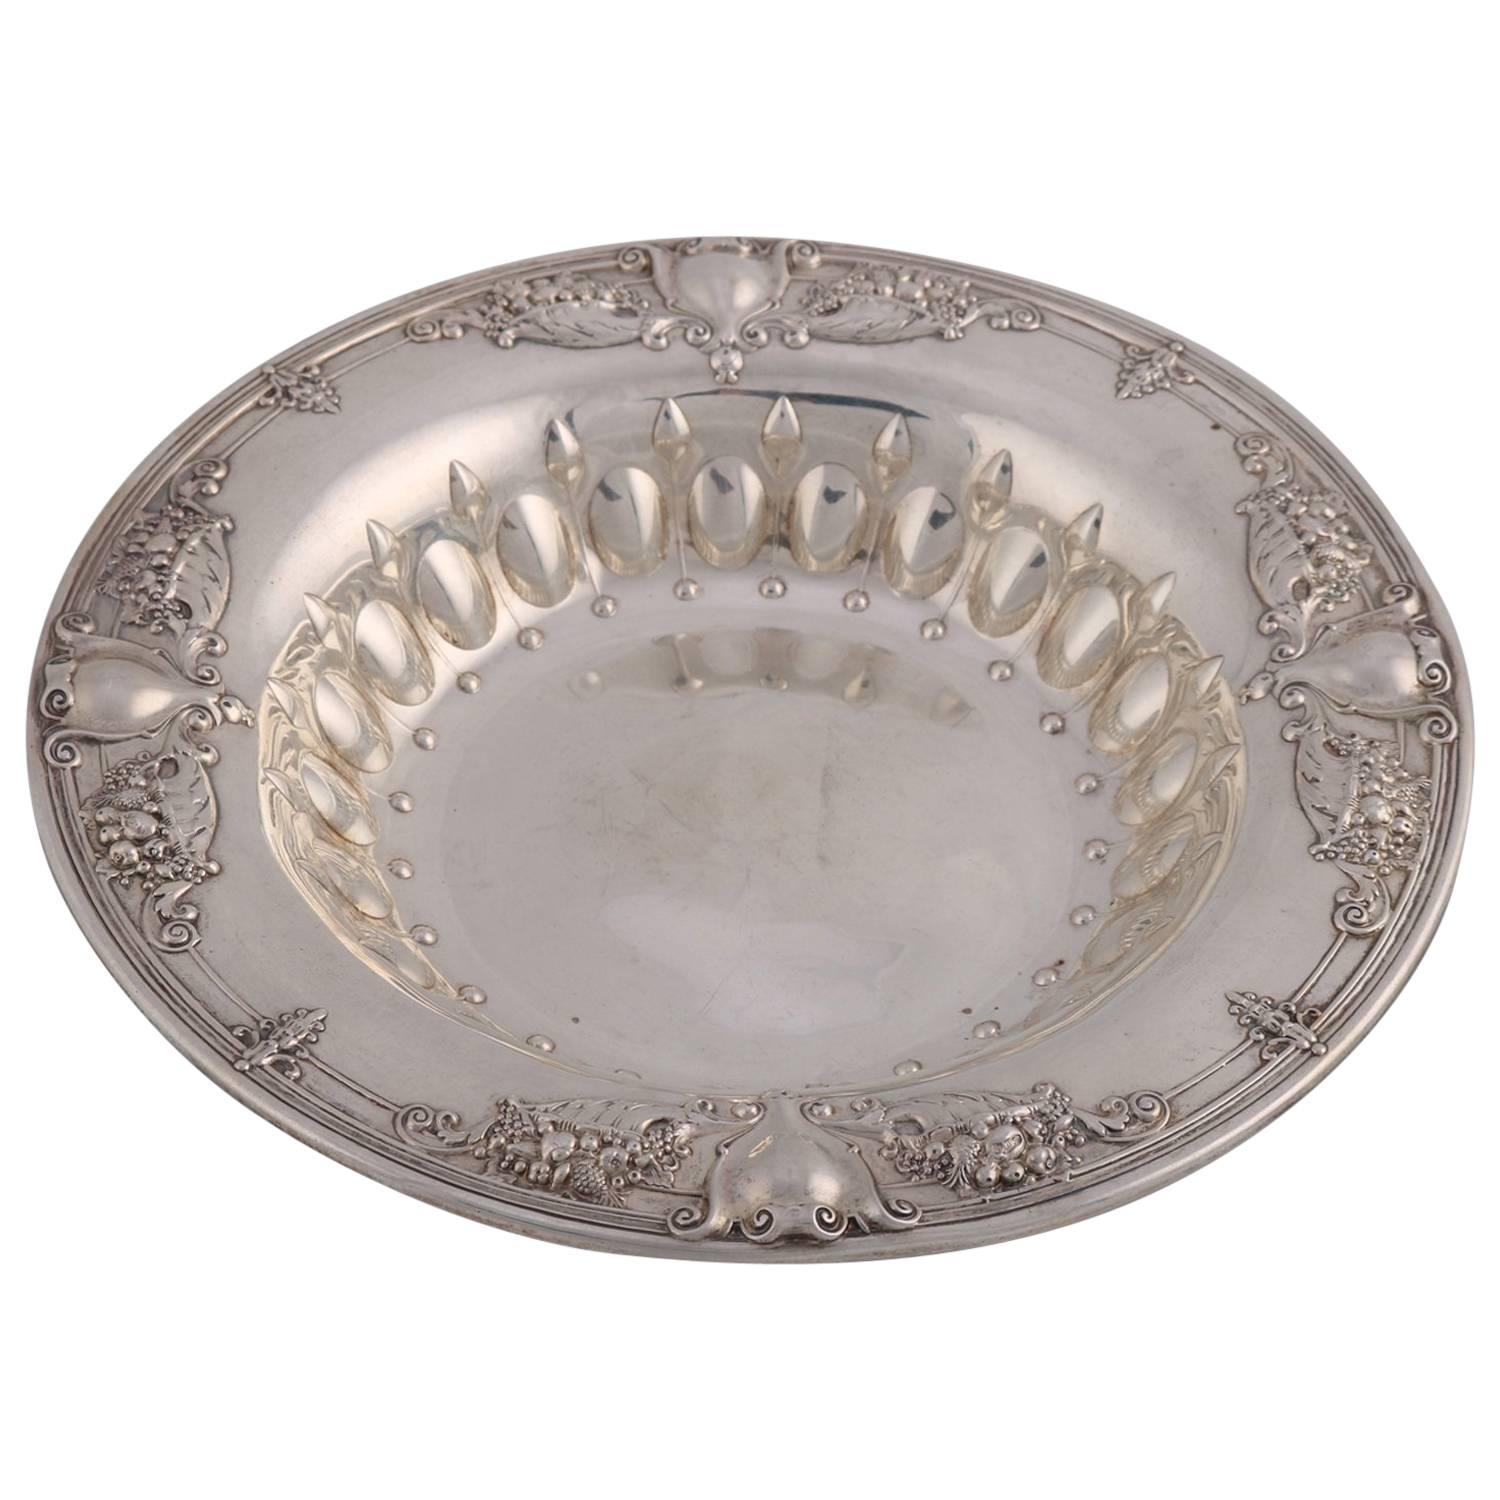 Neoclassical Shield and Floral Repousse Sterling Silver Round Bowl, circa 1900